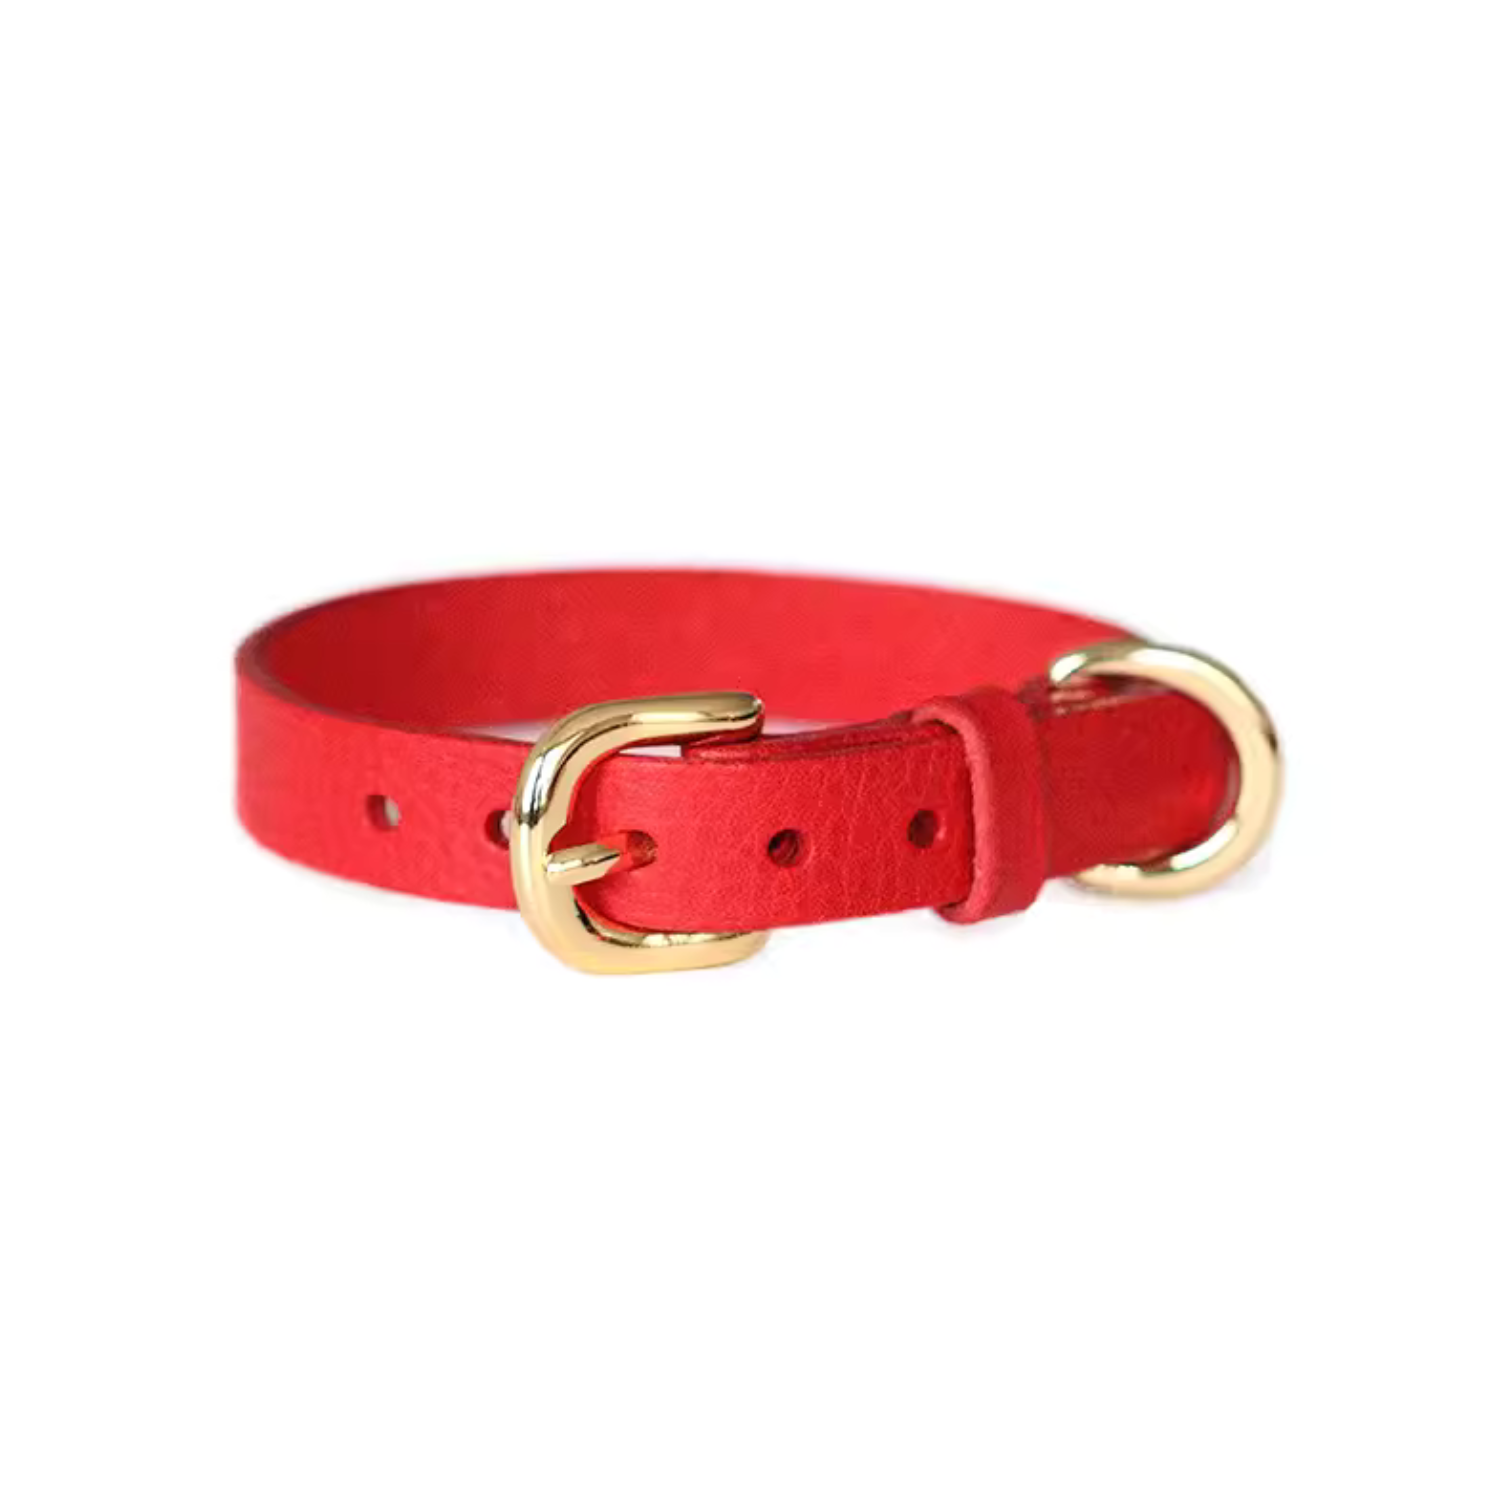 Red Smooth Calfskin Leather Buckle Cat Collar with D-Shape Buckle - Stylish and Comfortable